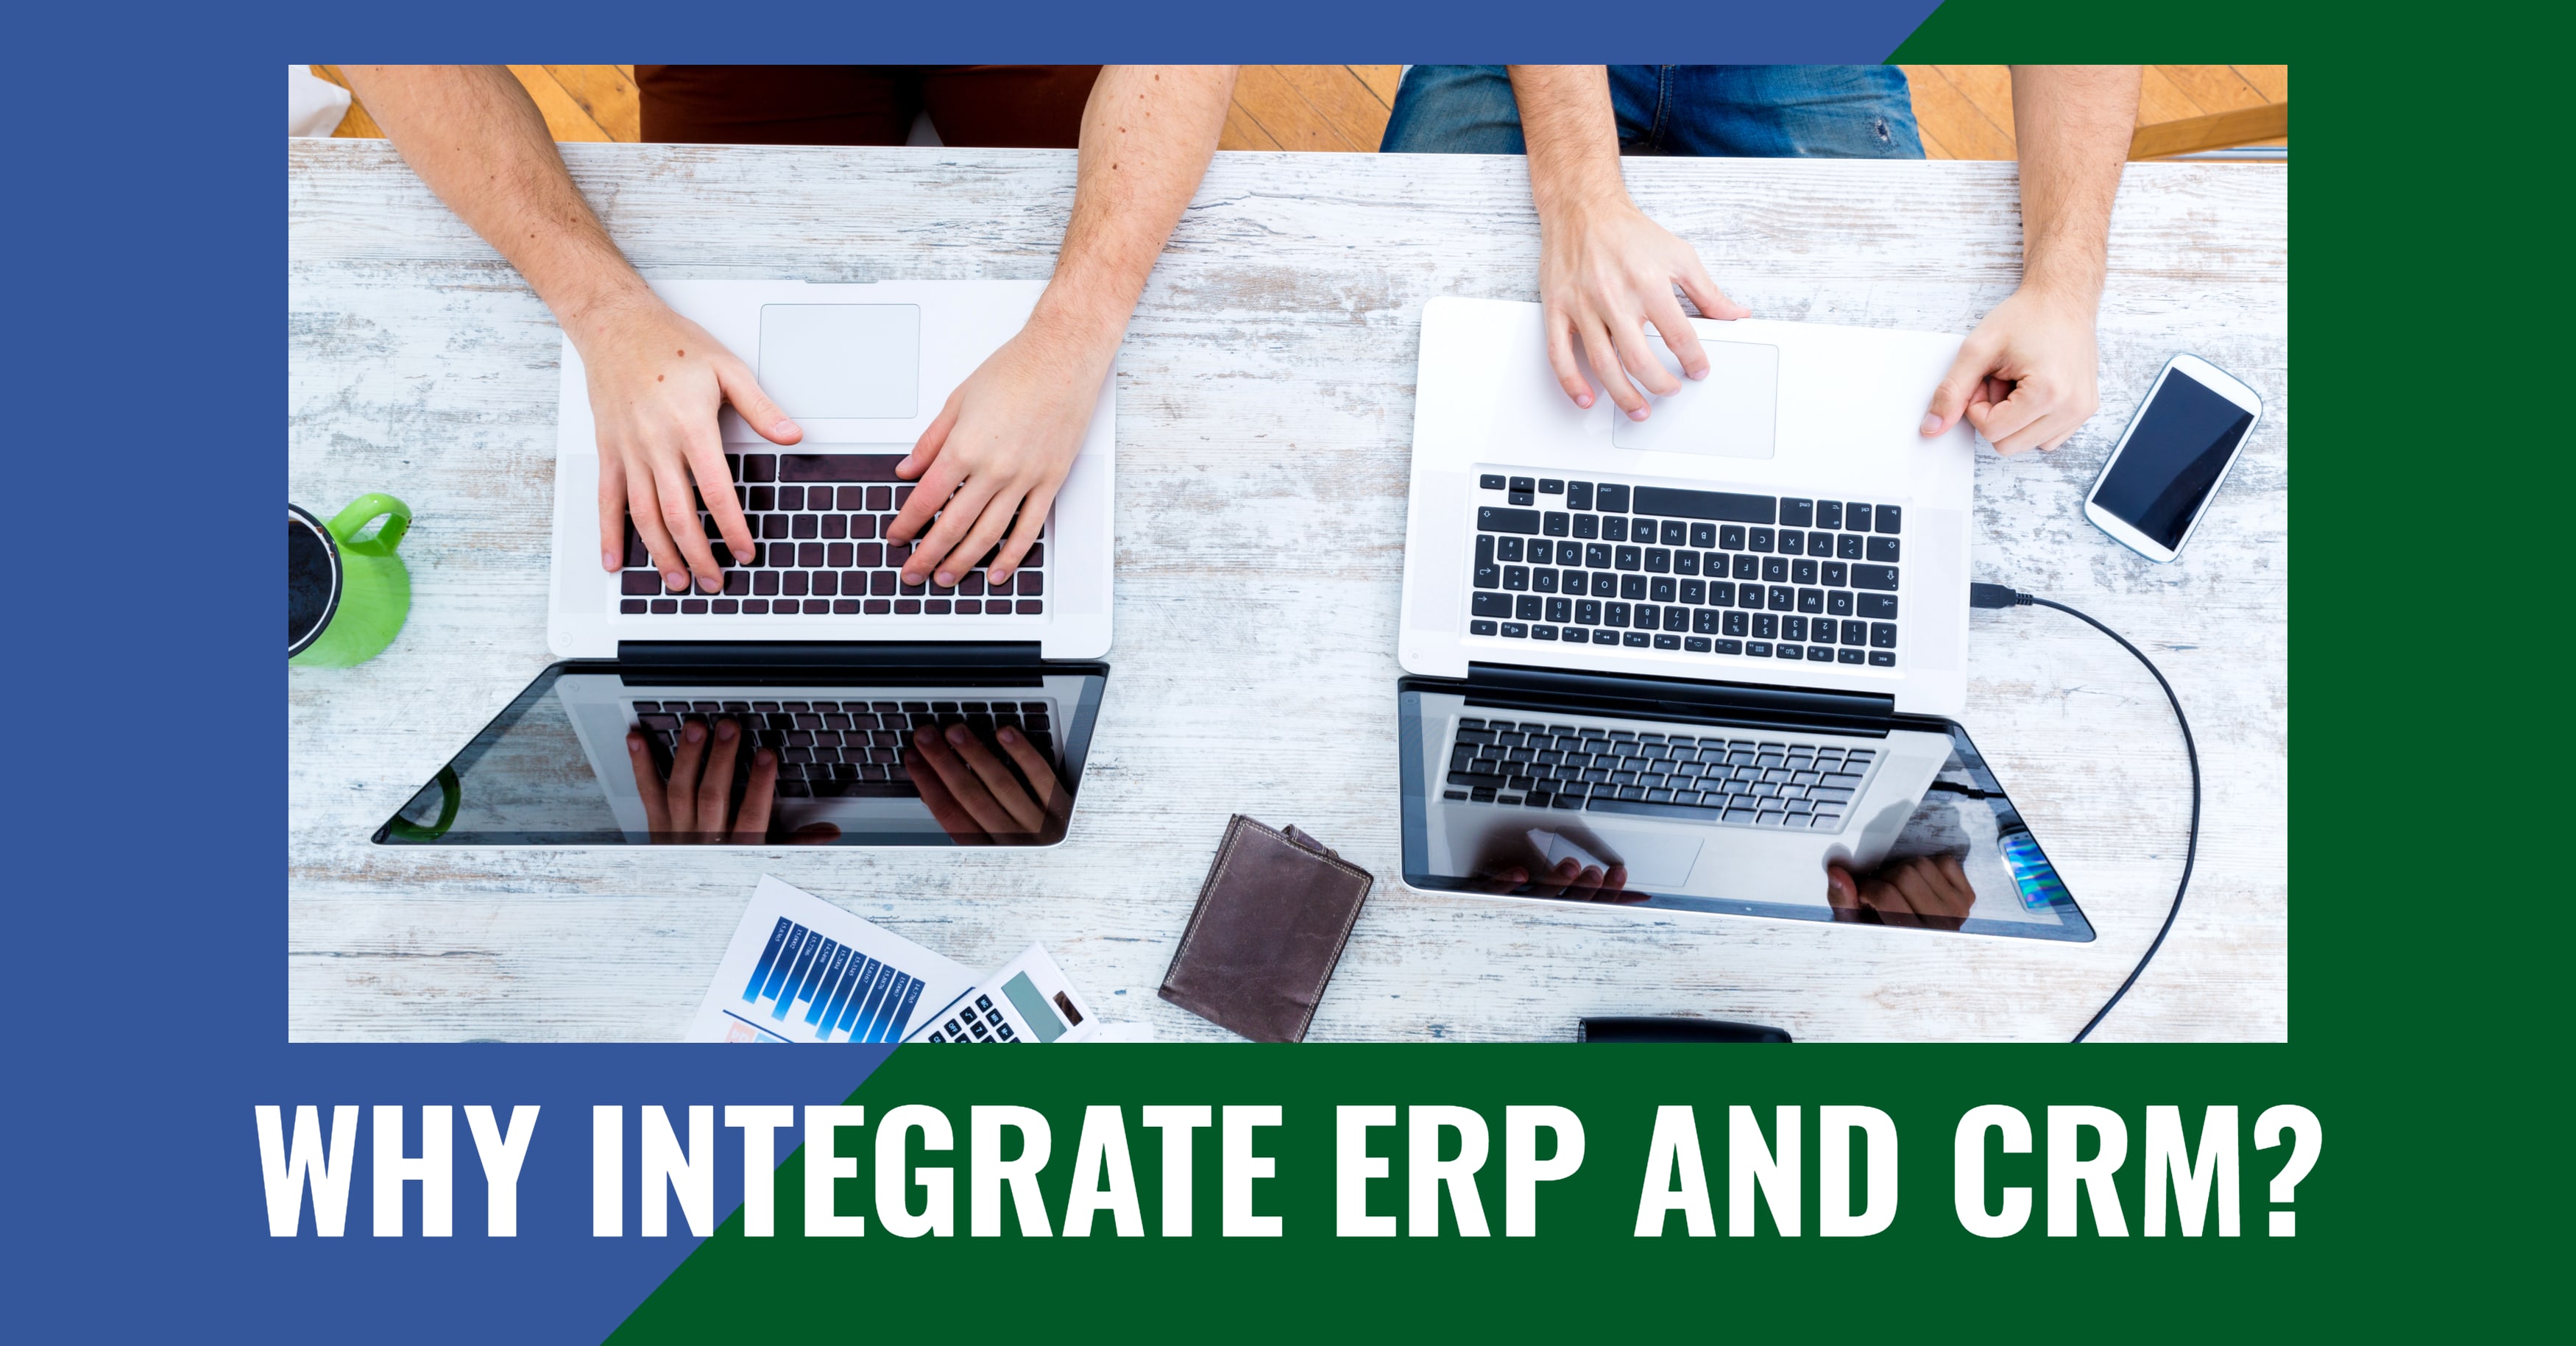 Integrate ERP and CRM